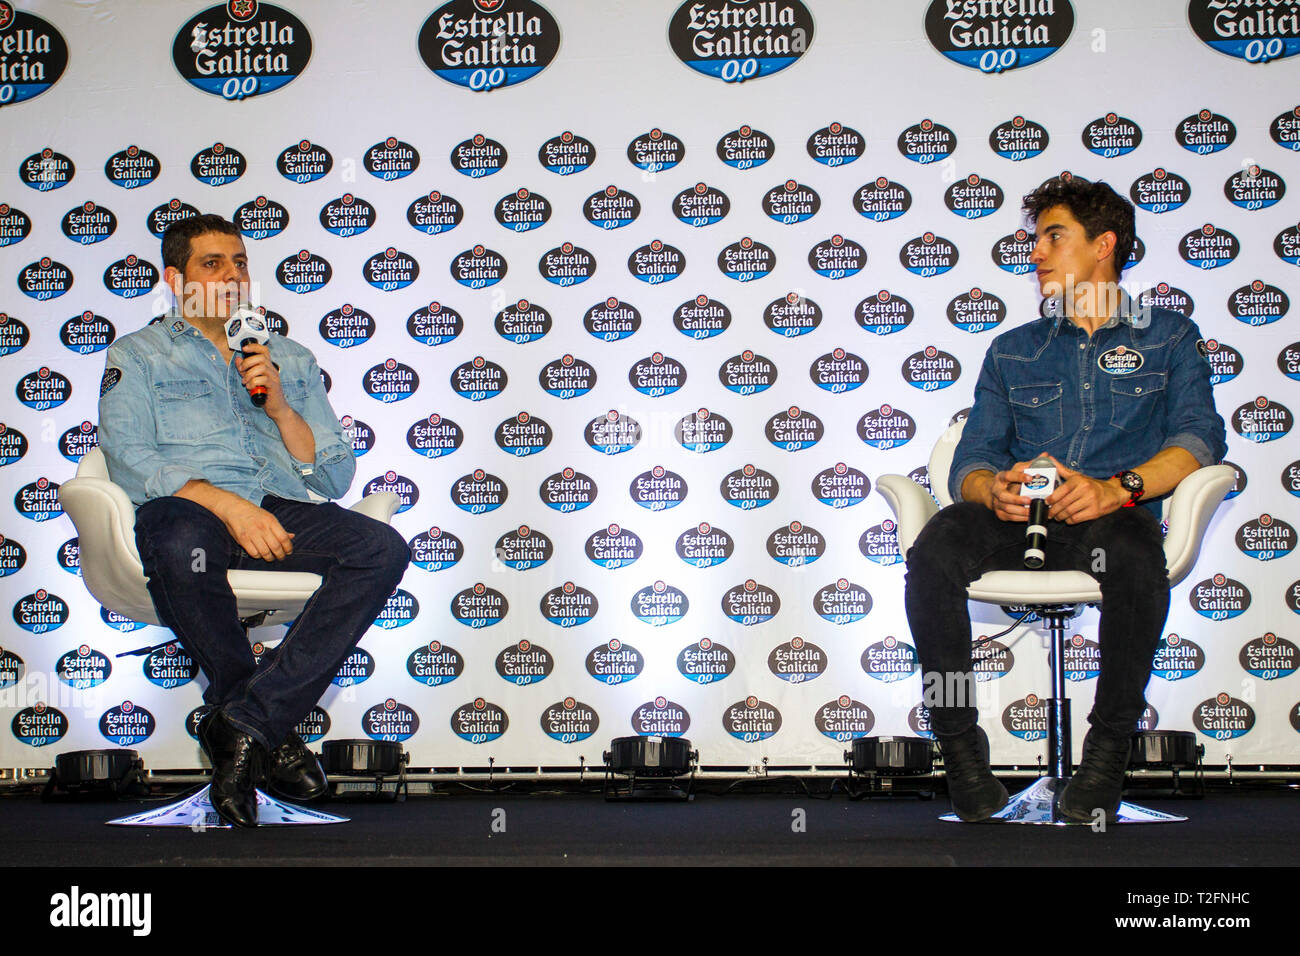 SÃO PAULO, SP - 02.04.2019: COLETIVA DO PILOTO MARC MARQUEZ - Press Conference with pilots Marc Márquez and Alexandre Barros held at Centro Cultural Rio Verde in São Paulo, SP. Held by the sponsor, the Spanish brewery Estrella Galicia, the riders highlighted the 2019 season of Moto GP and Superbike Brazil, respectively. (Photo: Emerson Santos/Fotoarena) Stock Photo